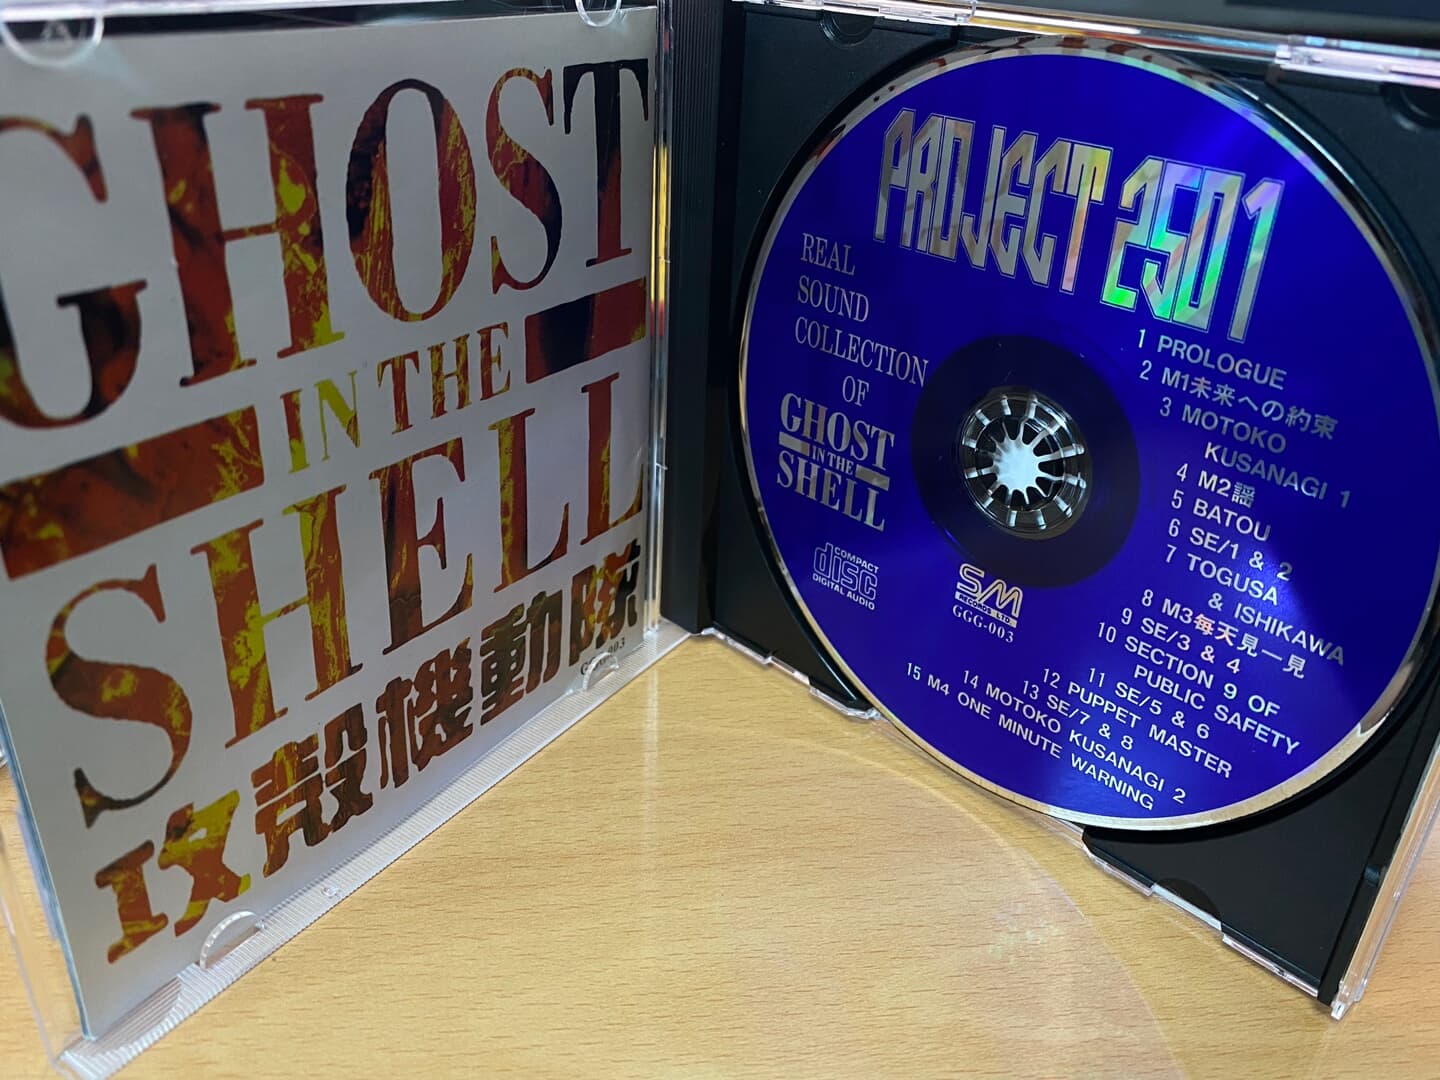 Ghost In The Shell (공각기동대) - Project 2501 Real Image Collection Of Ghost In The Shell